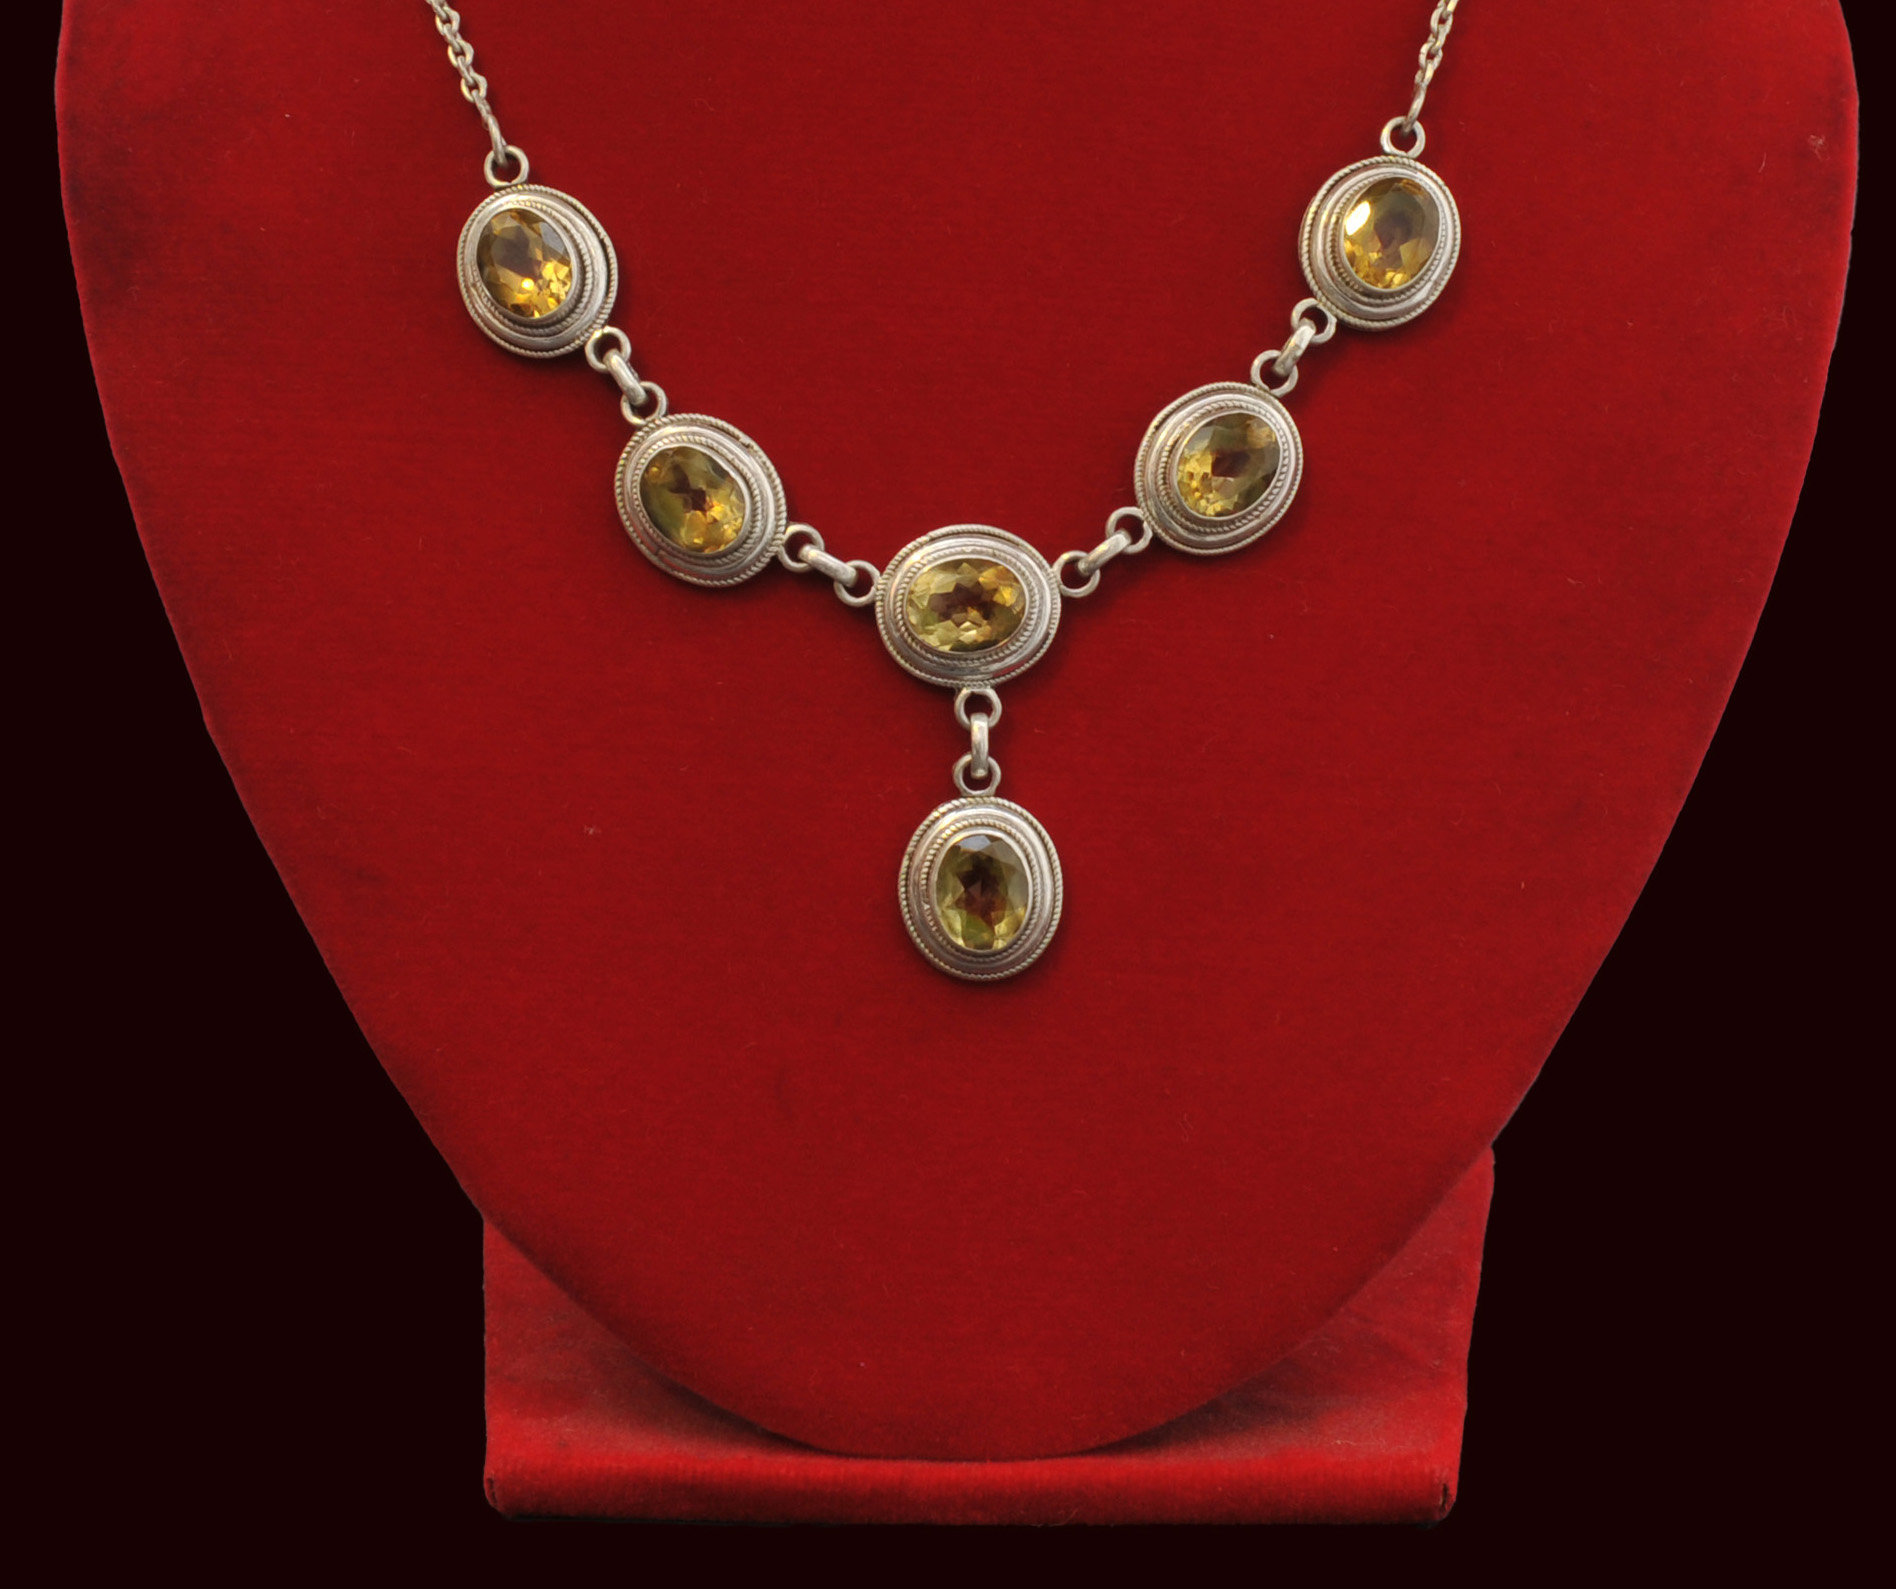 Designer Silver Necklace Of Six Stone Yellow Jewel (amber) Design.